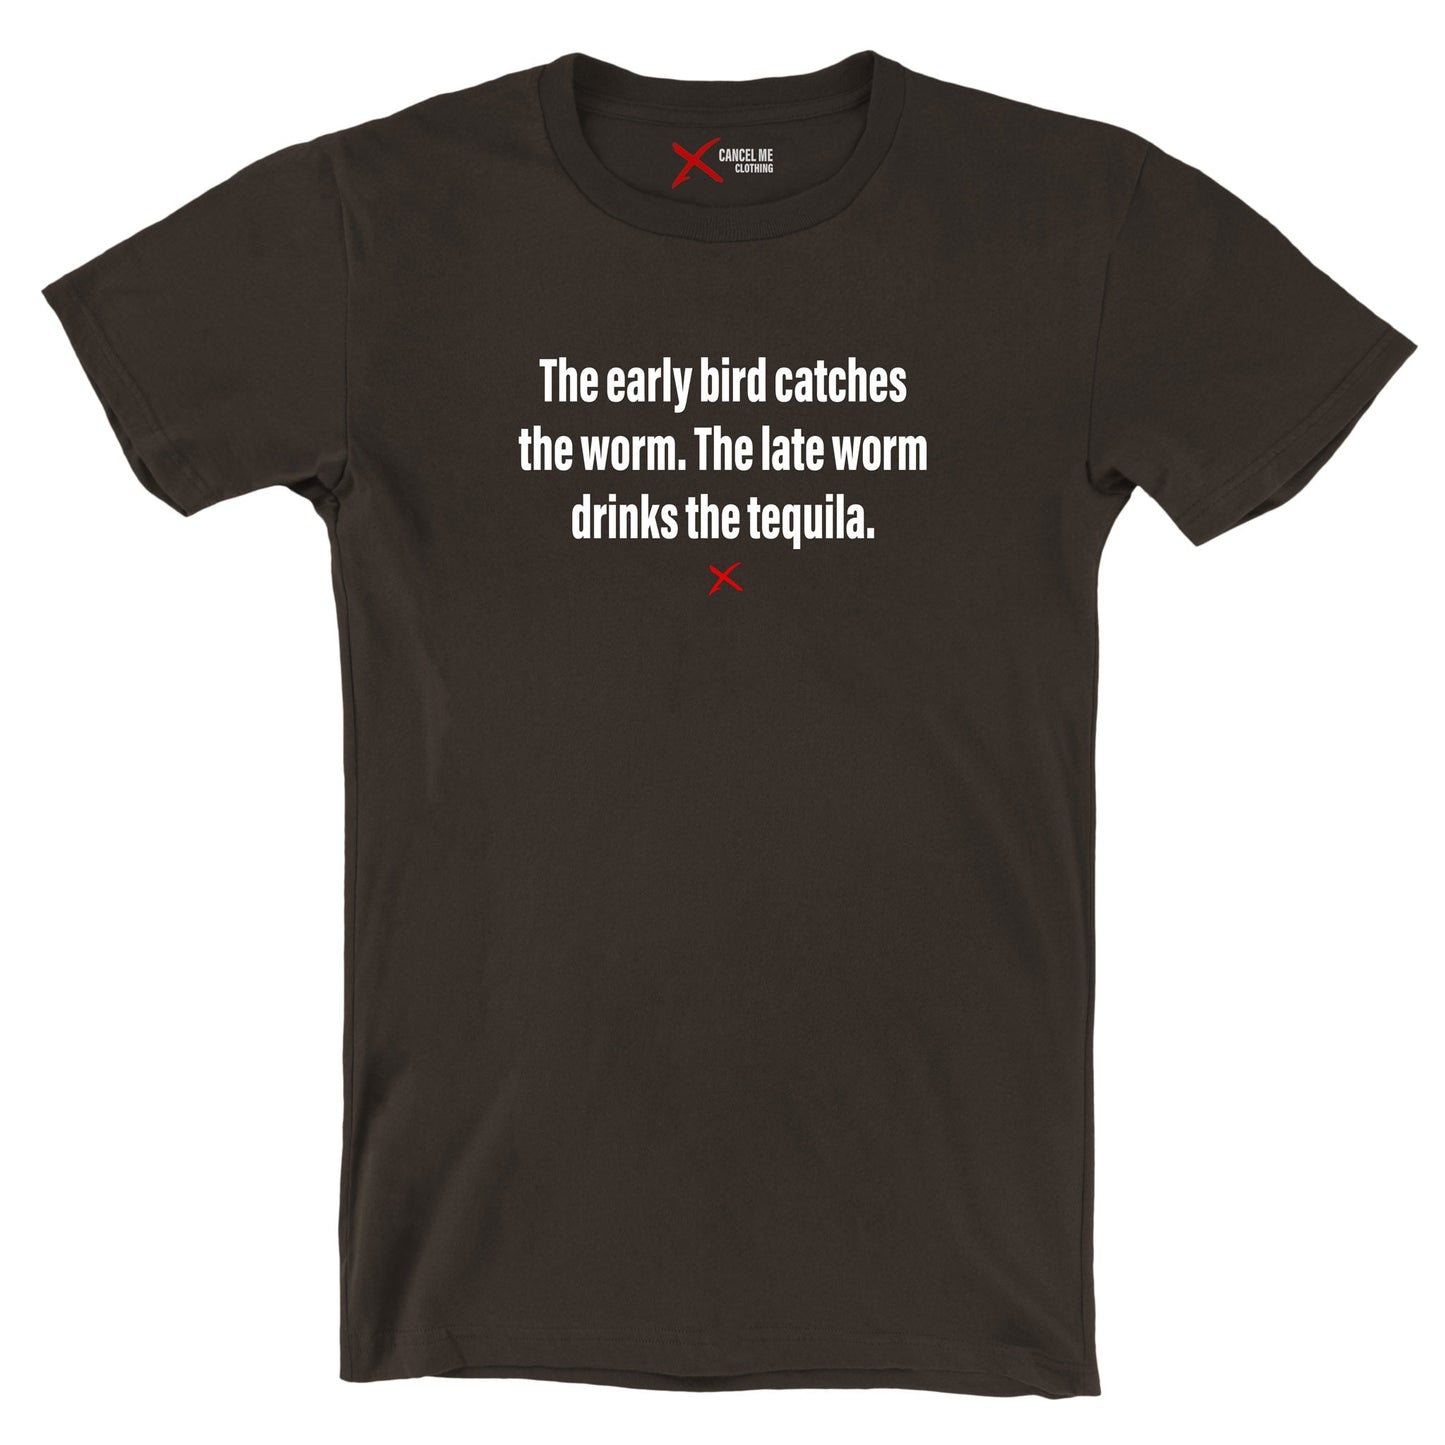 The early bird catches the worm. The late worm drinks the tequila. - Shirt